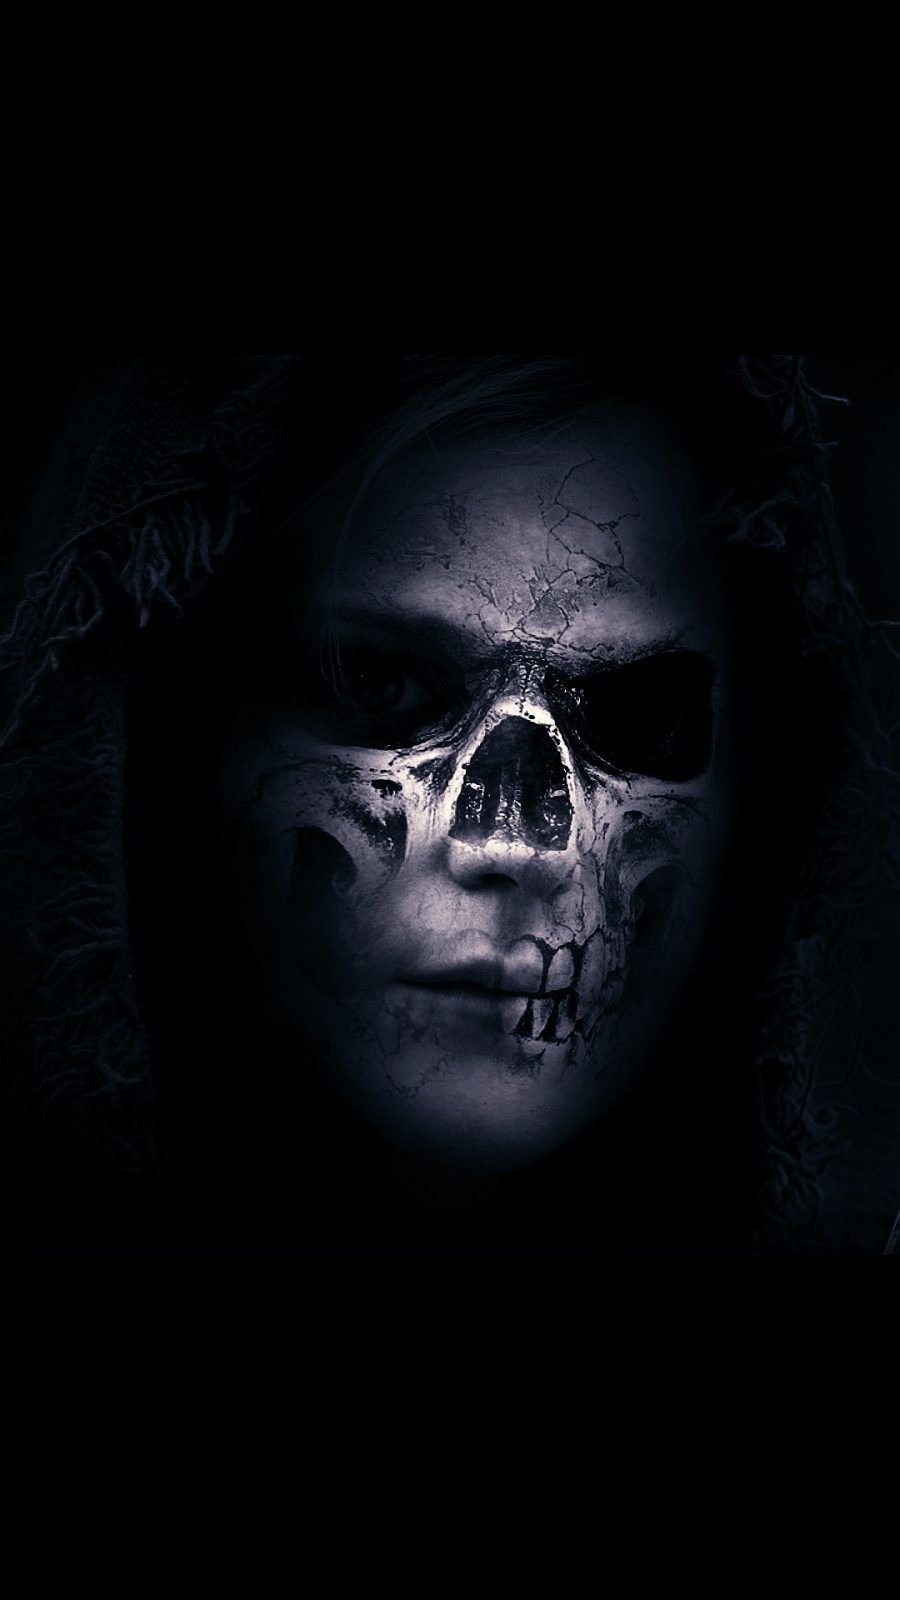 A picture of the face with skull and crossbones - Creepy